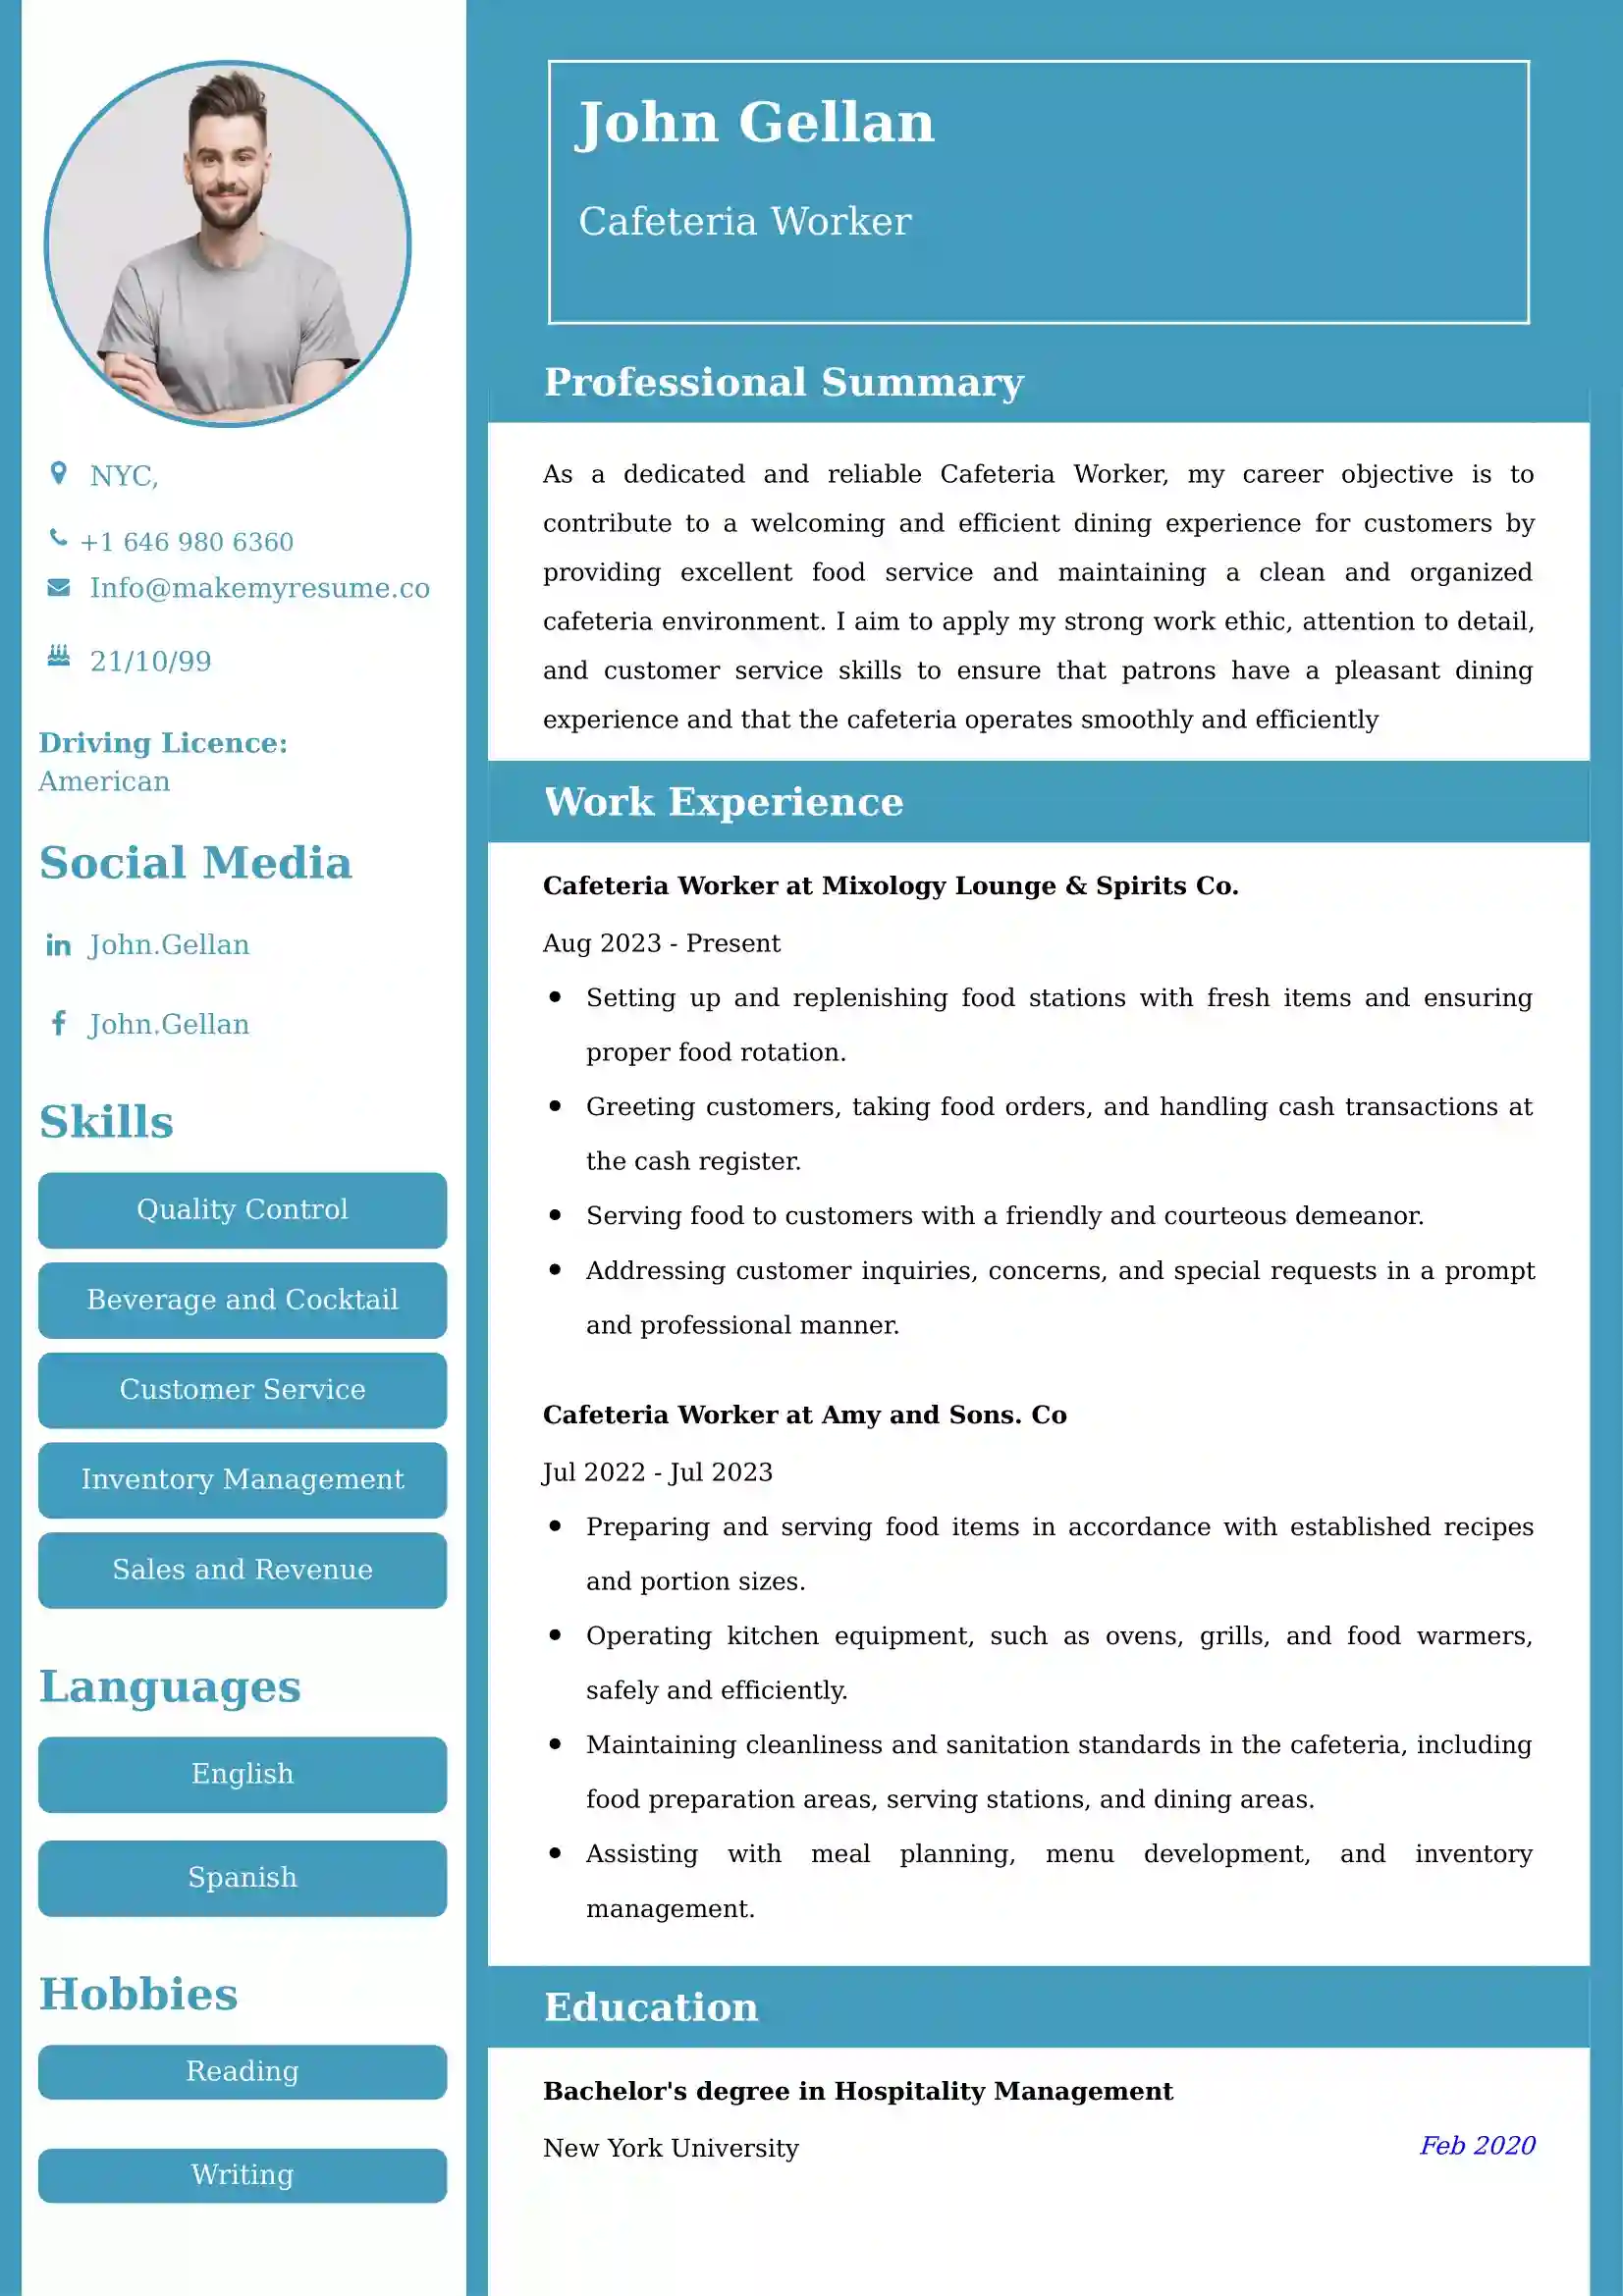 Cafeteria Worker Resume Examples - Australian Format and Tips